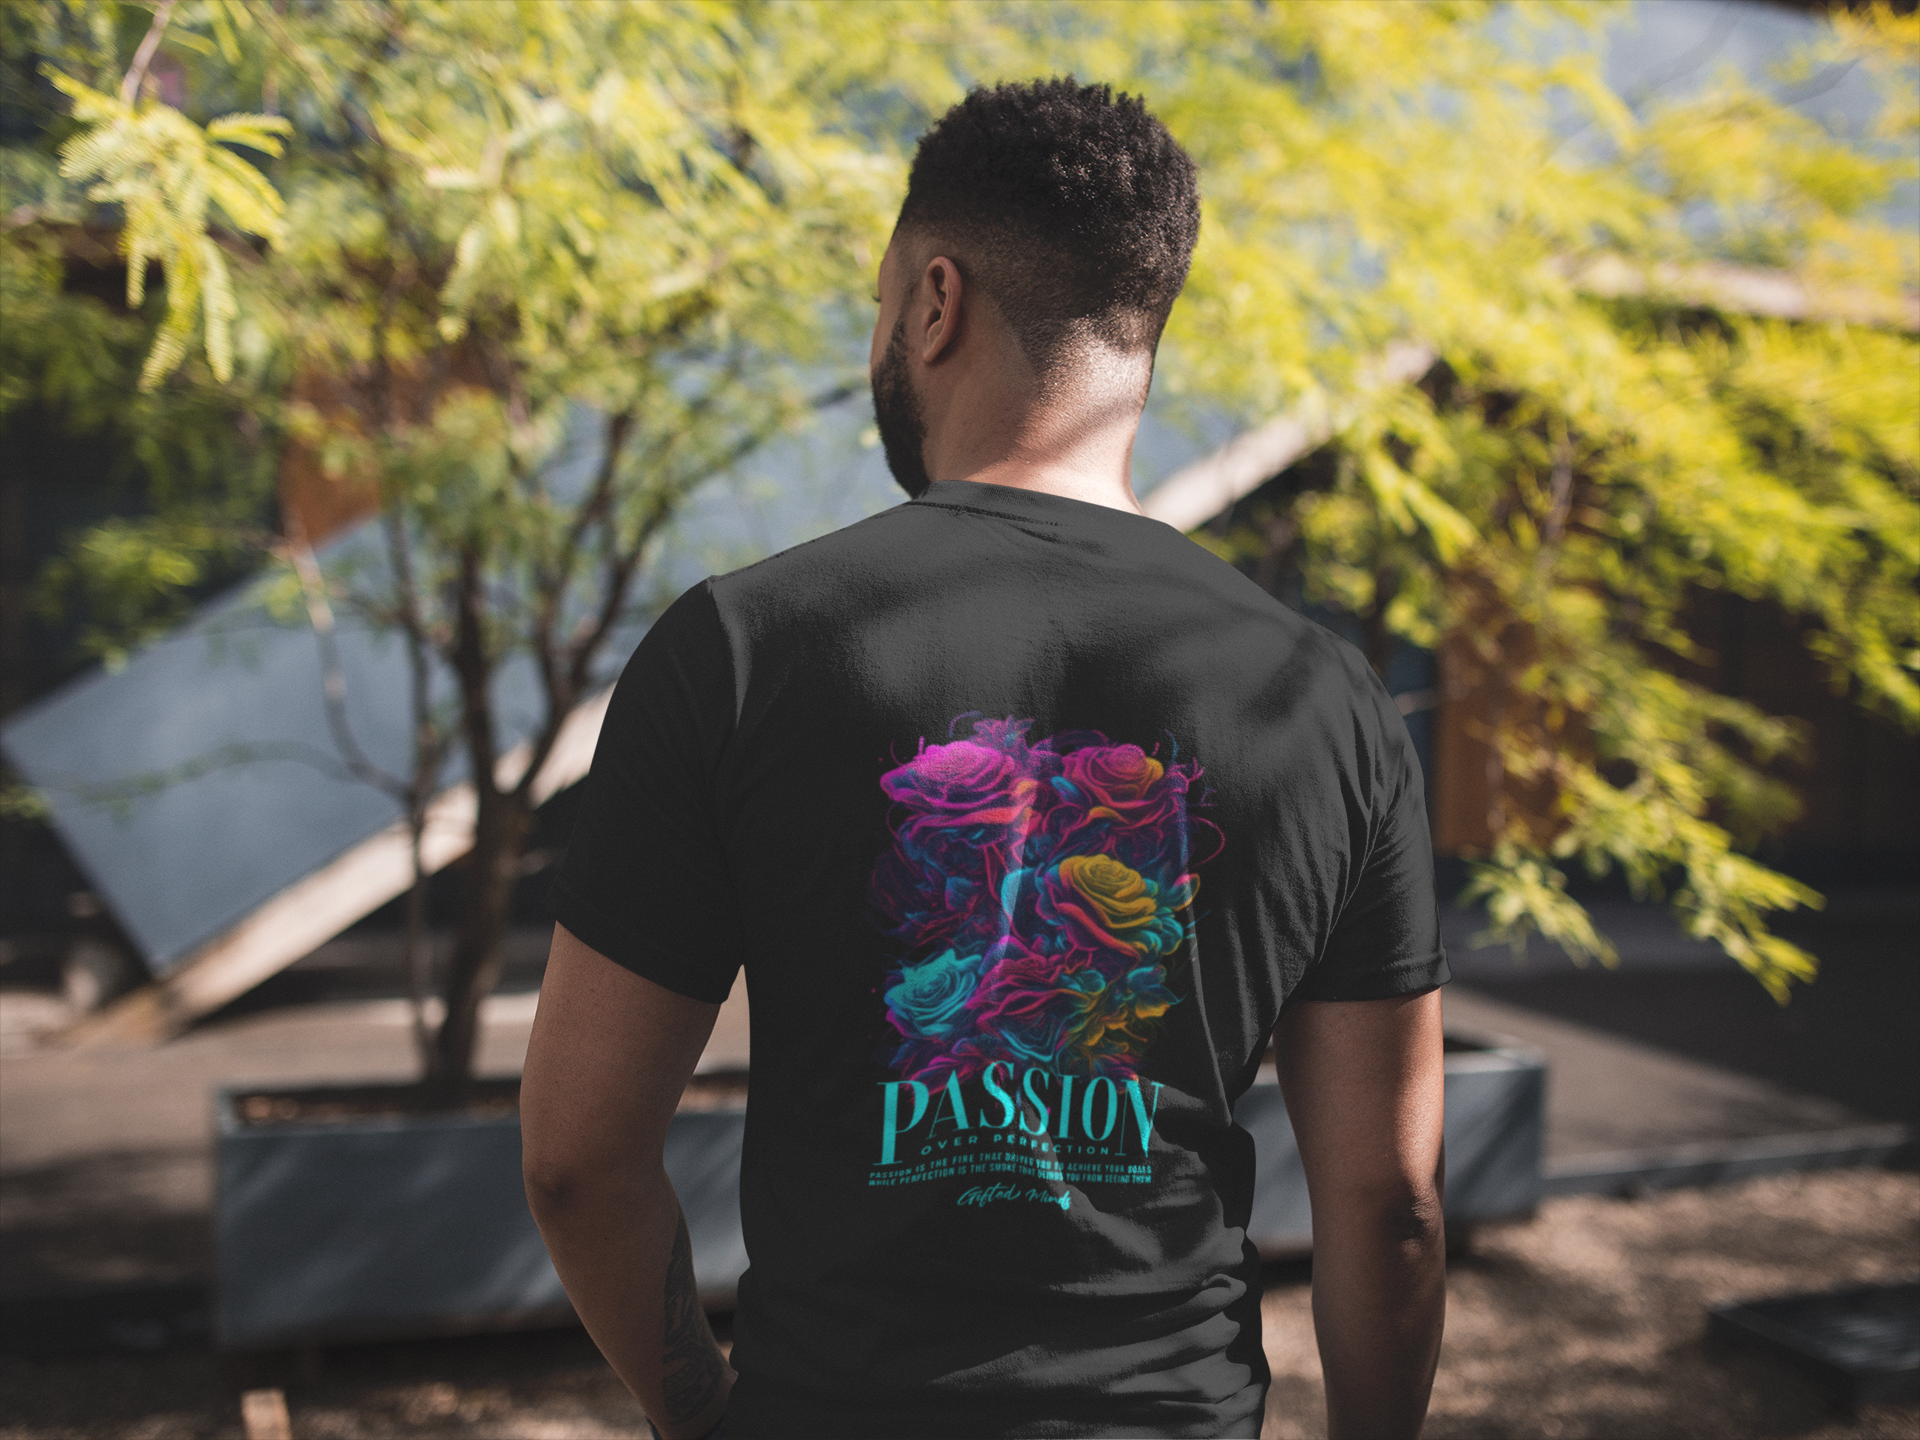 Passion Short Sleeve Tee - GFTD MNDS